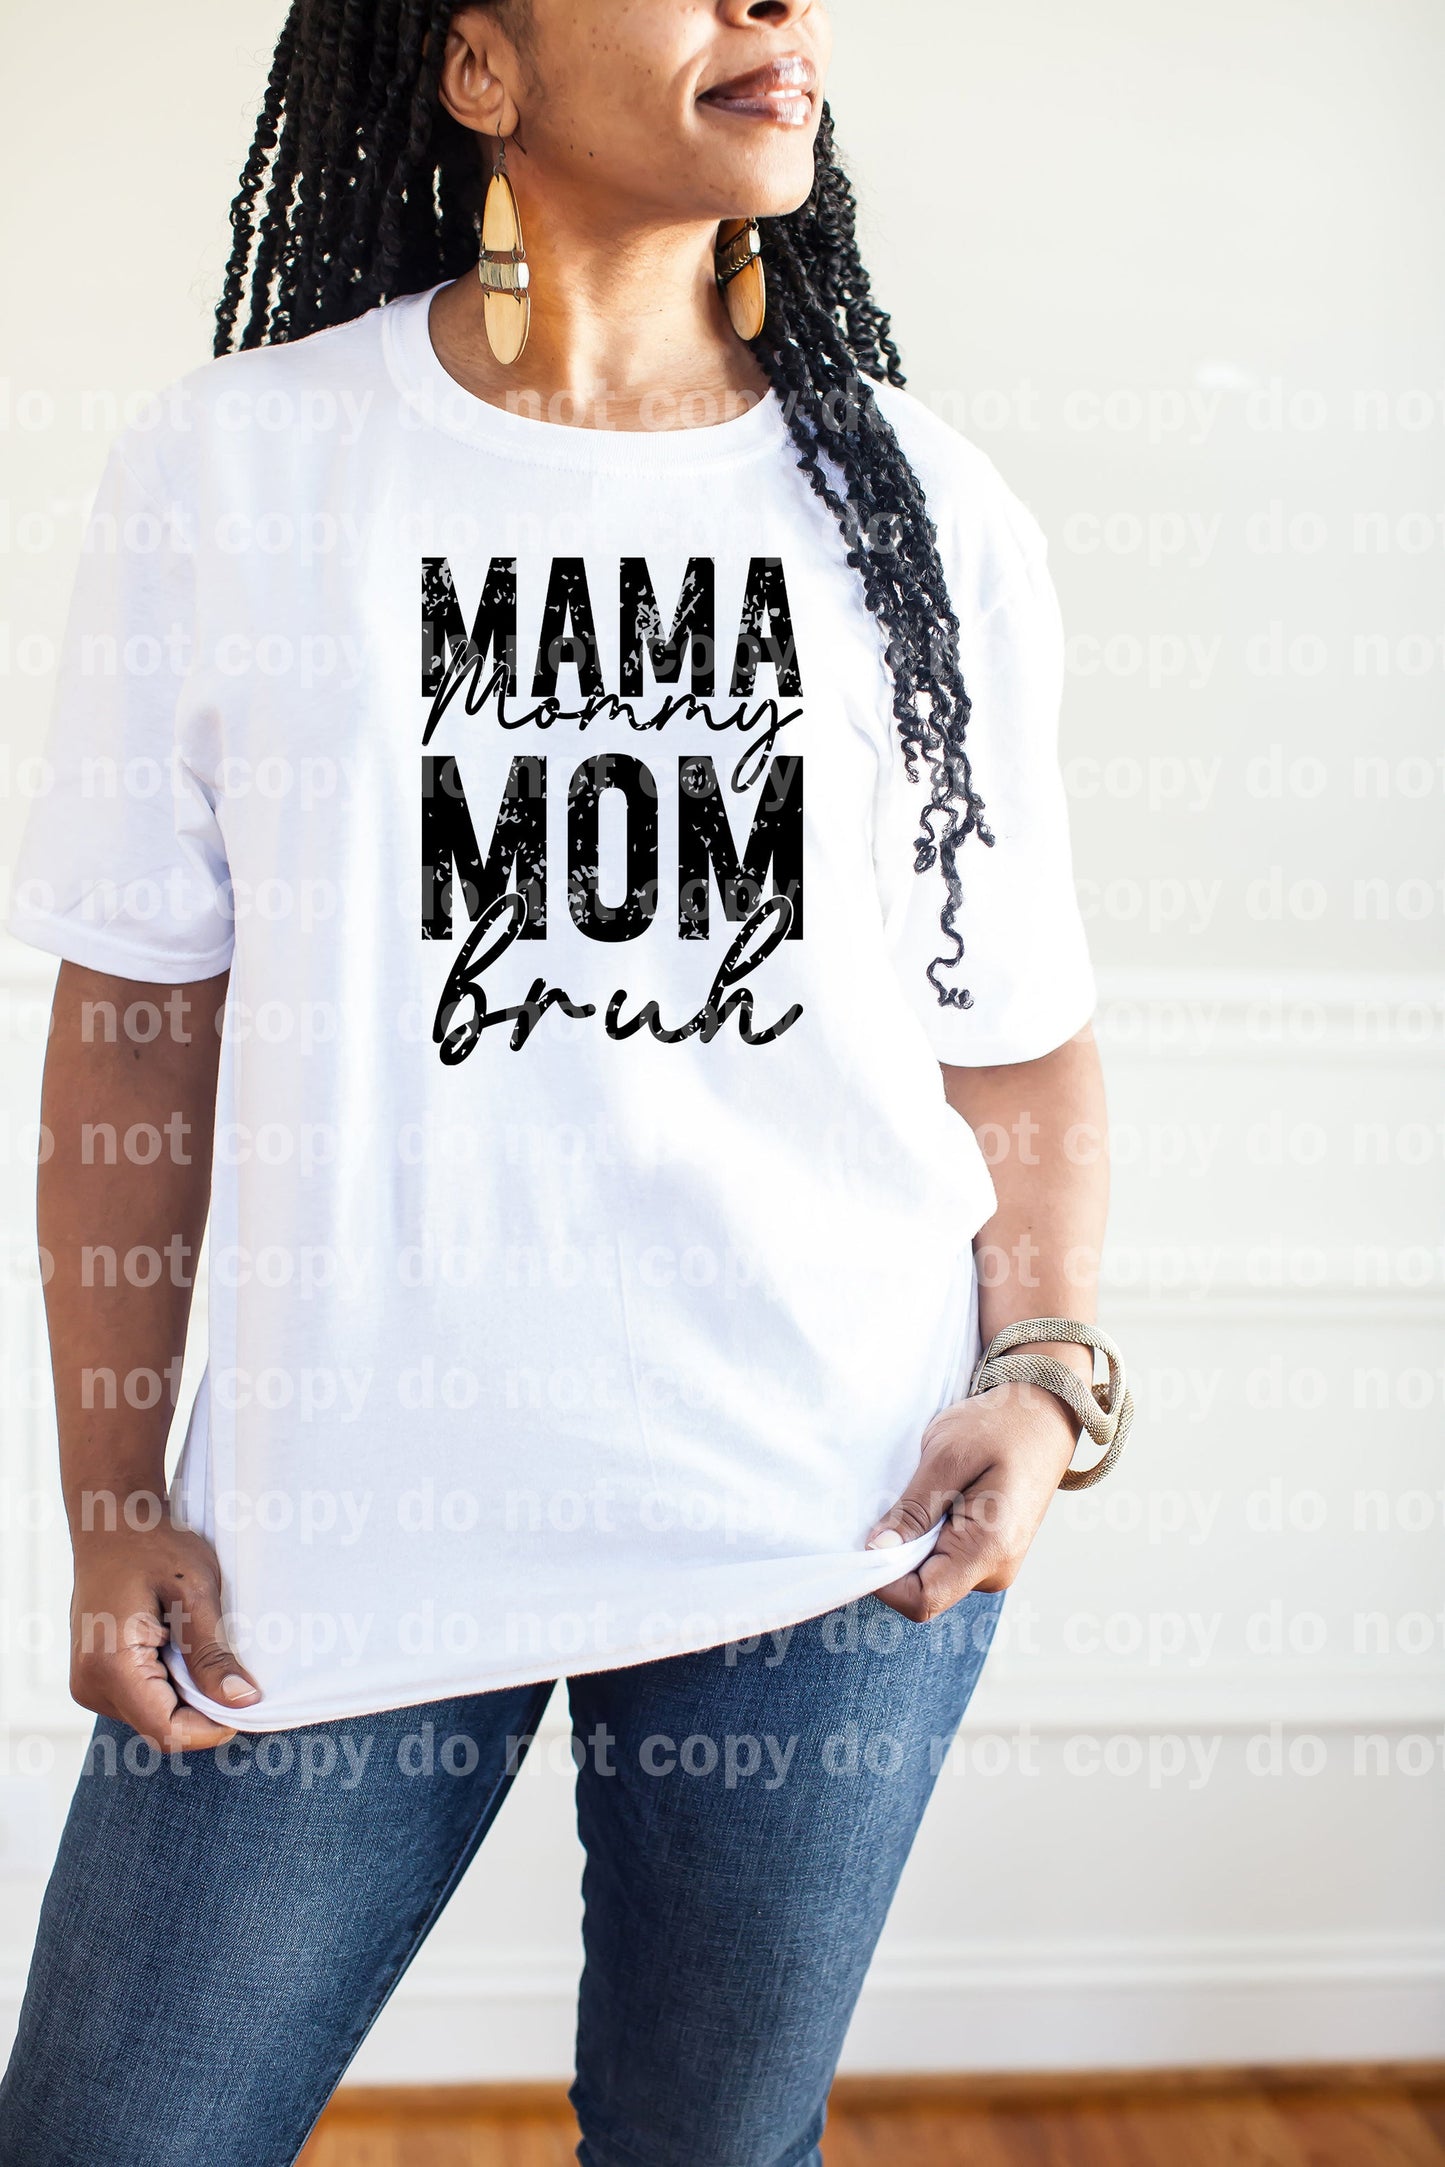 Mama Mommy Mom Bruh Stacked Distressed Black/White Dream Print or Sublimation Print